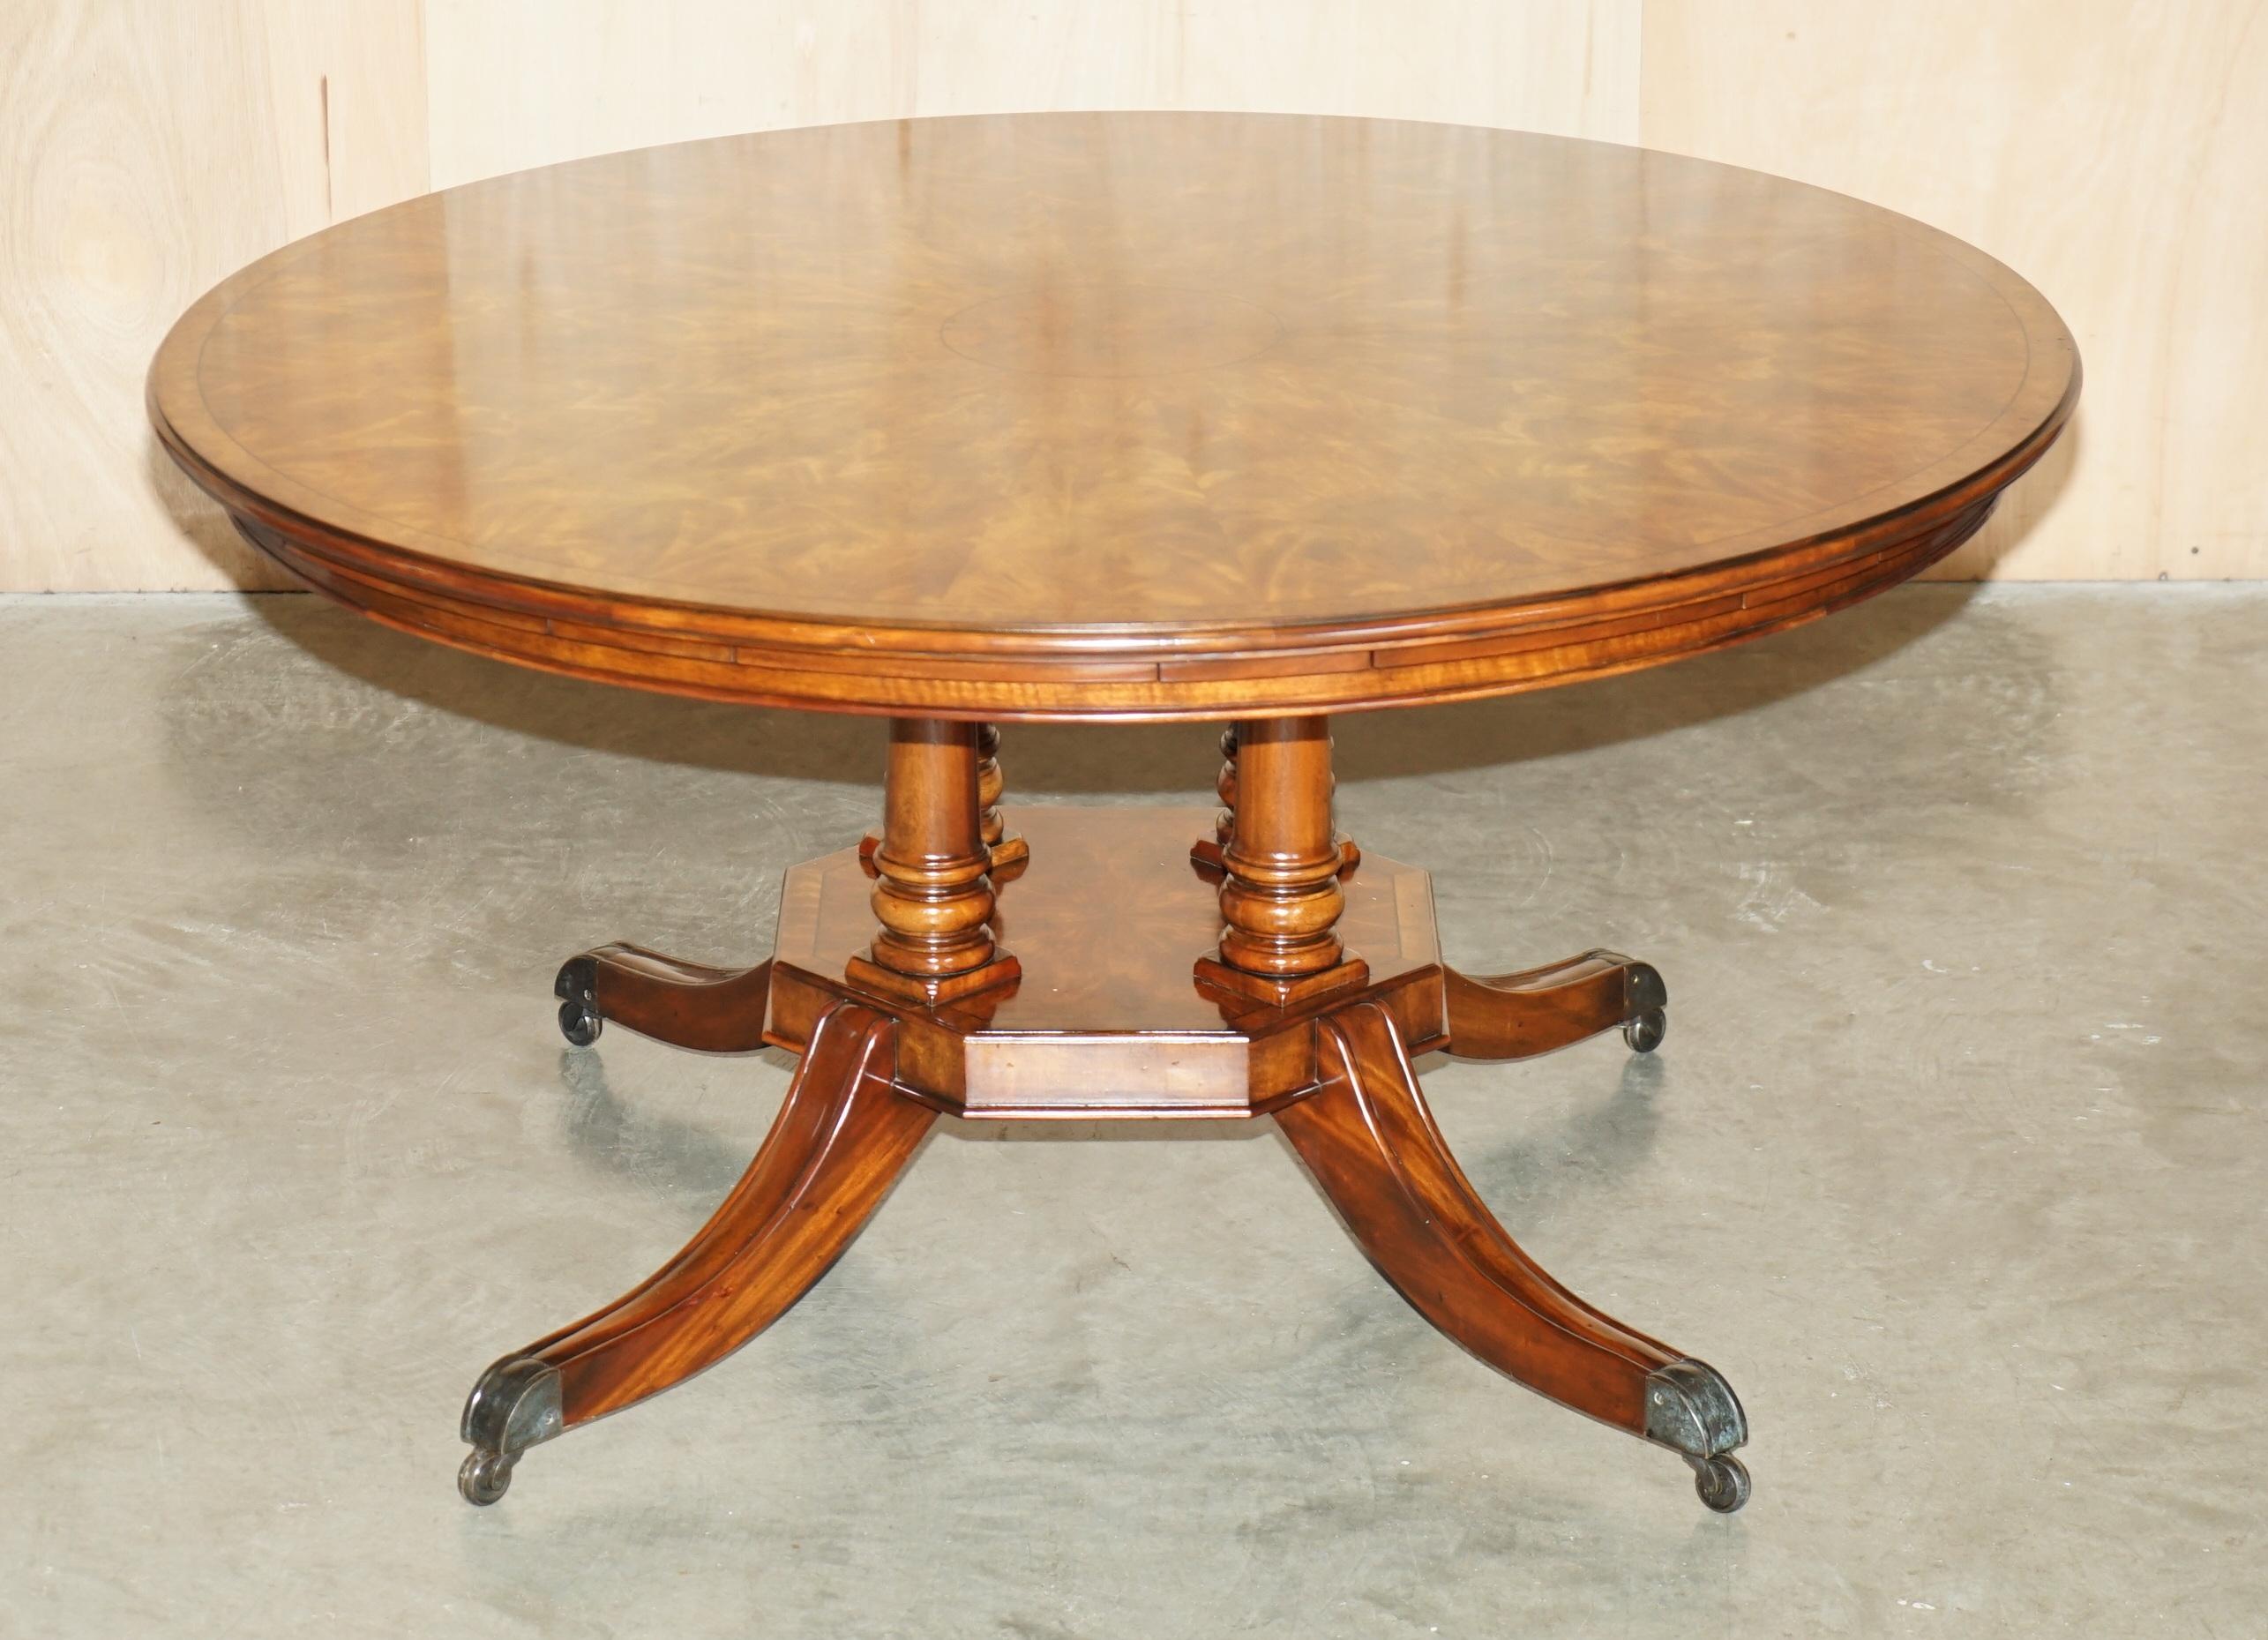 Royal House Antiques

Royal House Antiques is delighted to offer for sale this stunning RRP £23,800 Theodore Alexander Jupe Extending round dining table in Walnut, Burr Walnut and Flamed Mahogany 

Please note the delivery fee listed is just a